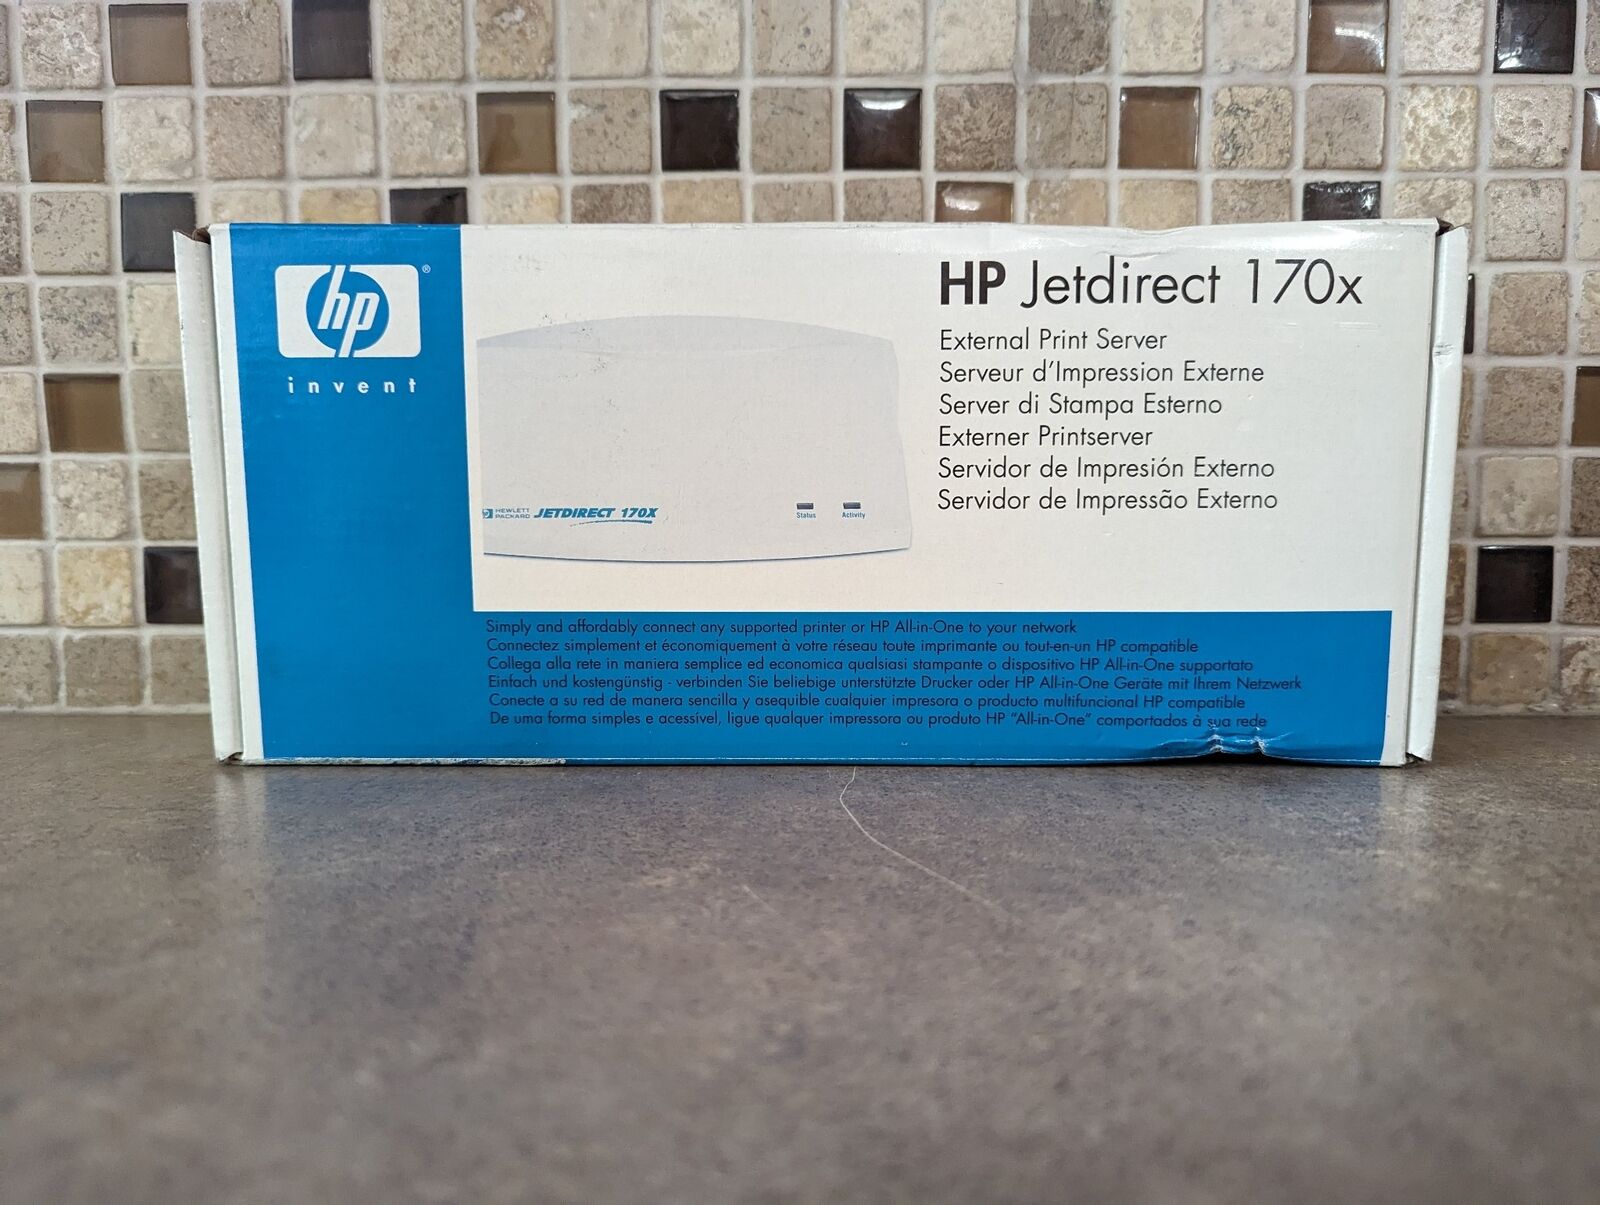 HP JETDIRECT 170X OFFICECONNECT EXTERNAL PRINT SERVER RSVLD-0605 ULB3-4